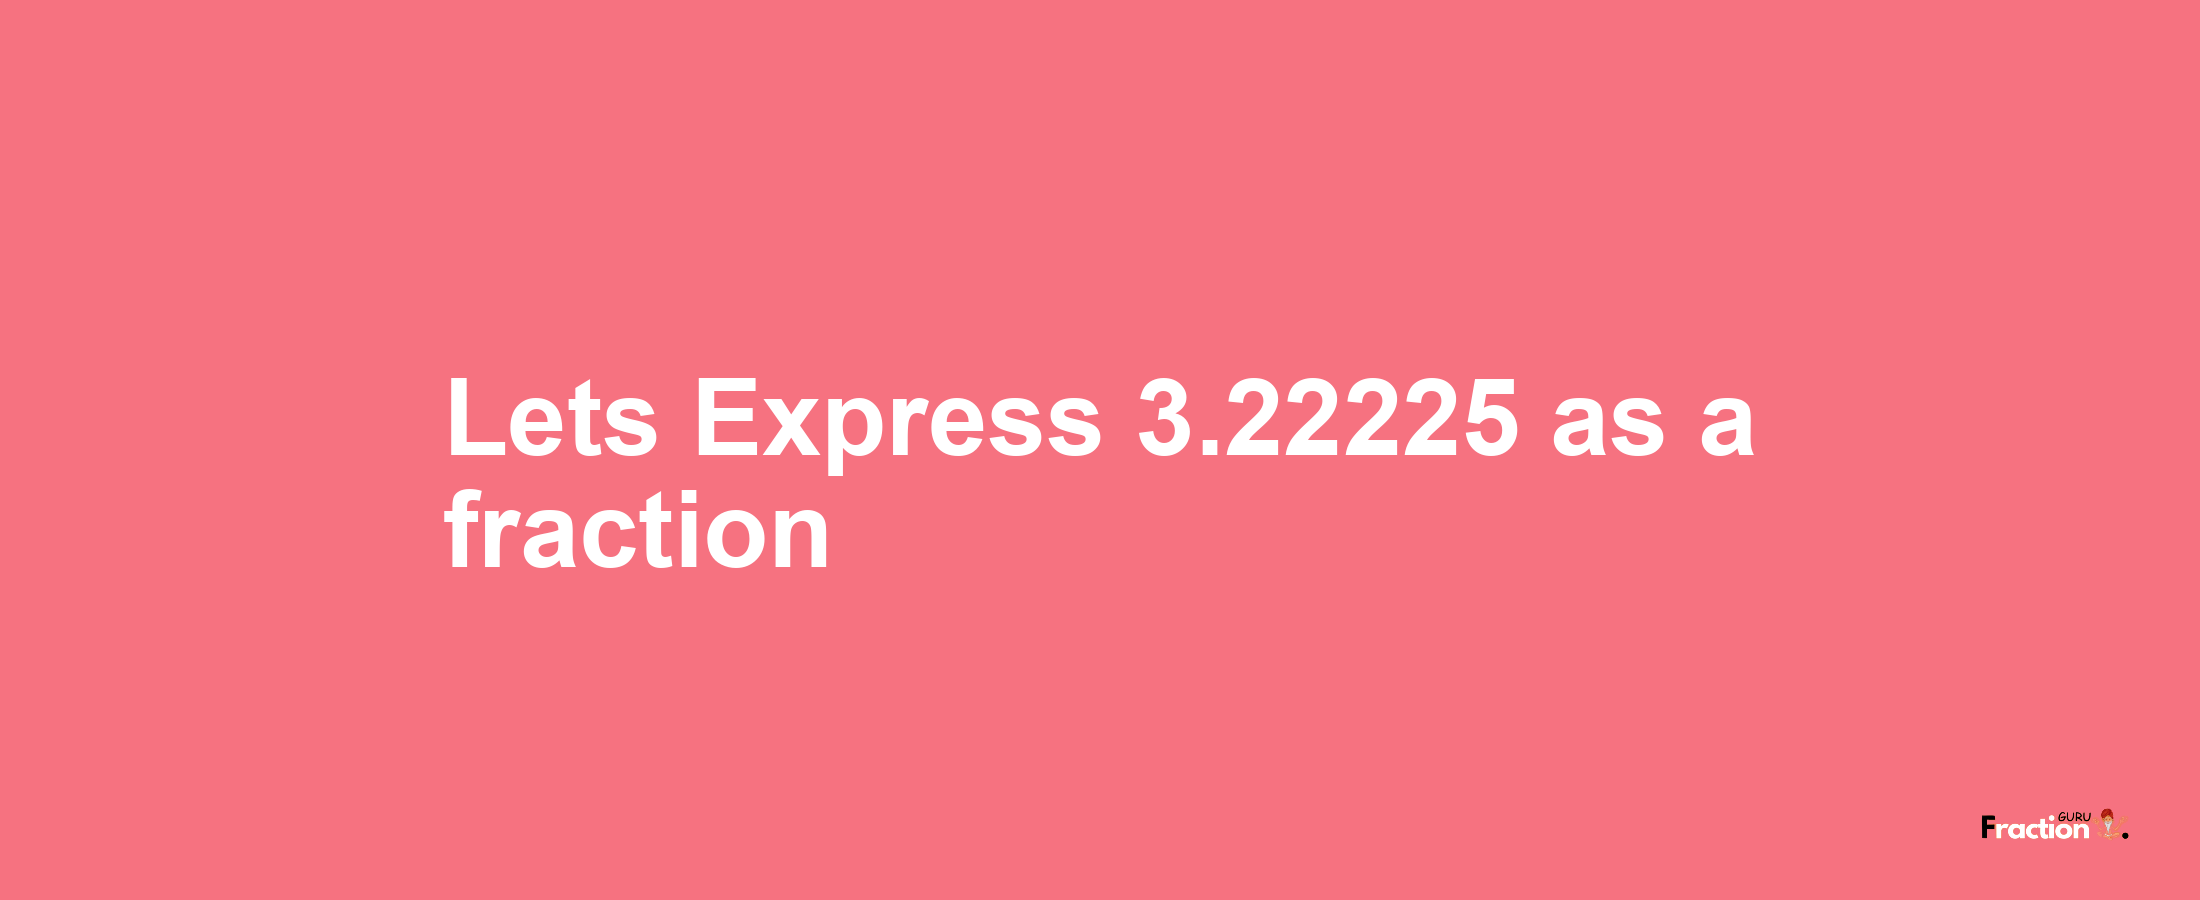 Lets Express 3.22225 as afraction